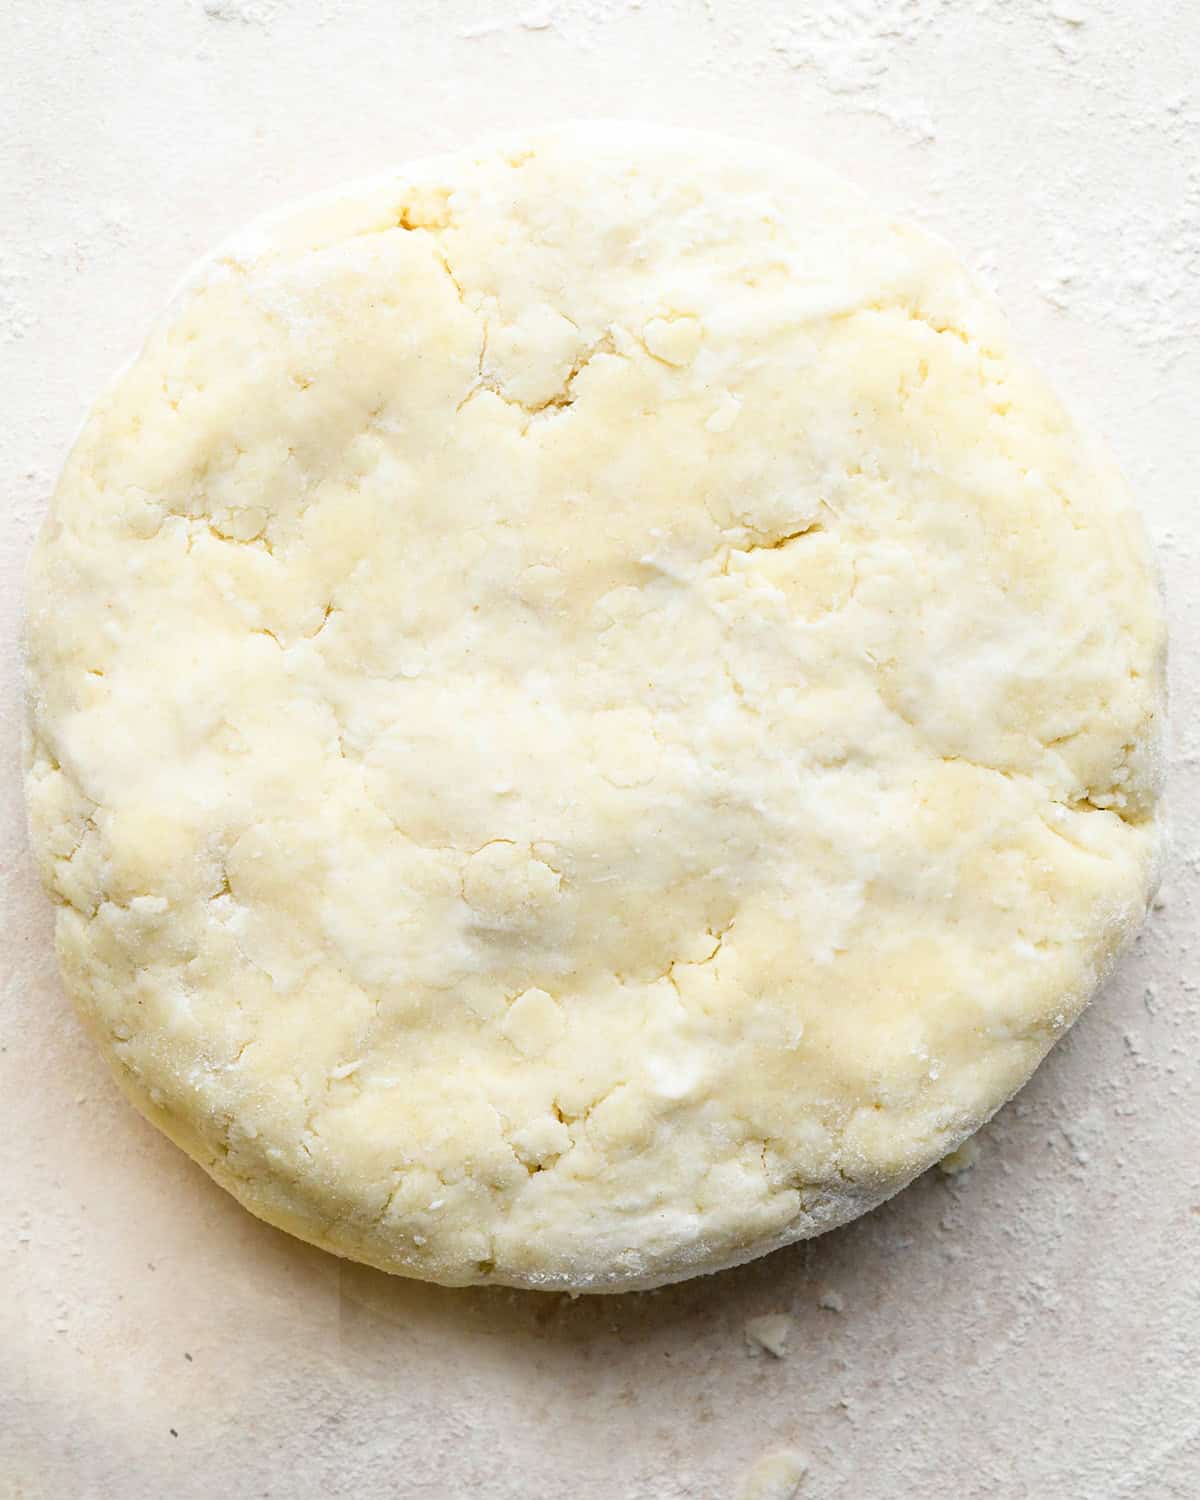 dairy free pumpkin pie crust dough formed into a round disc